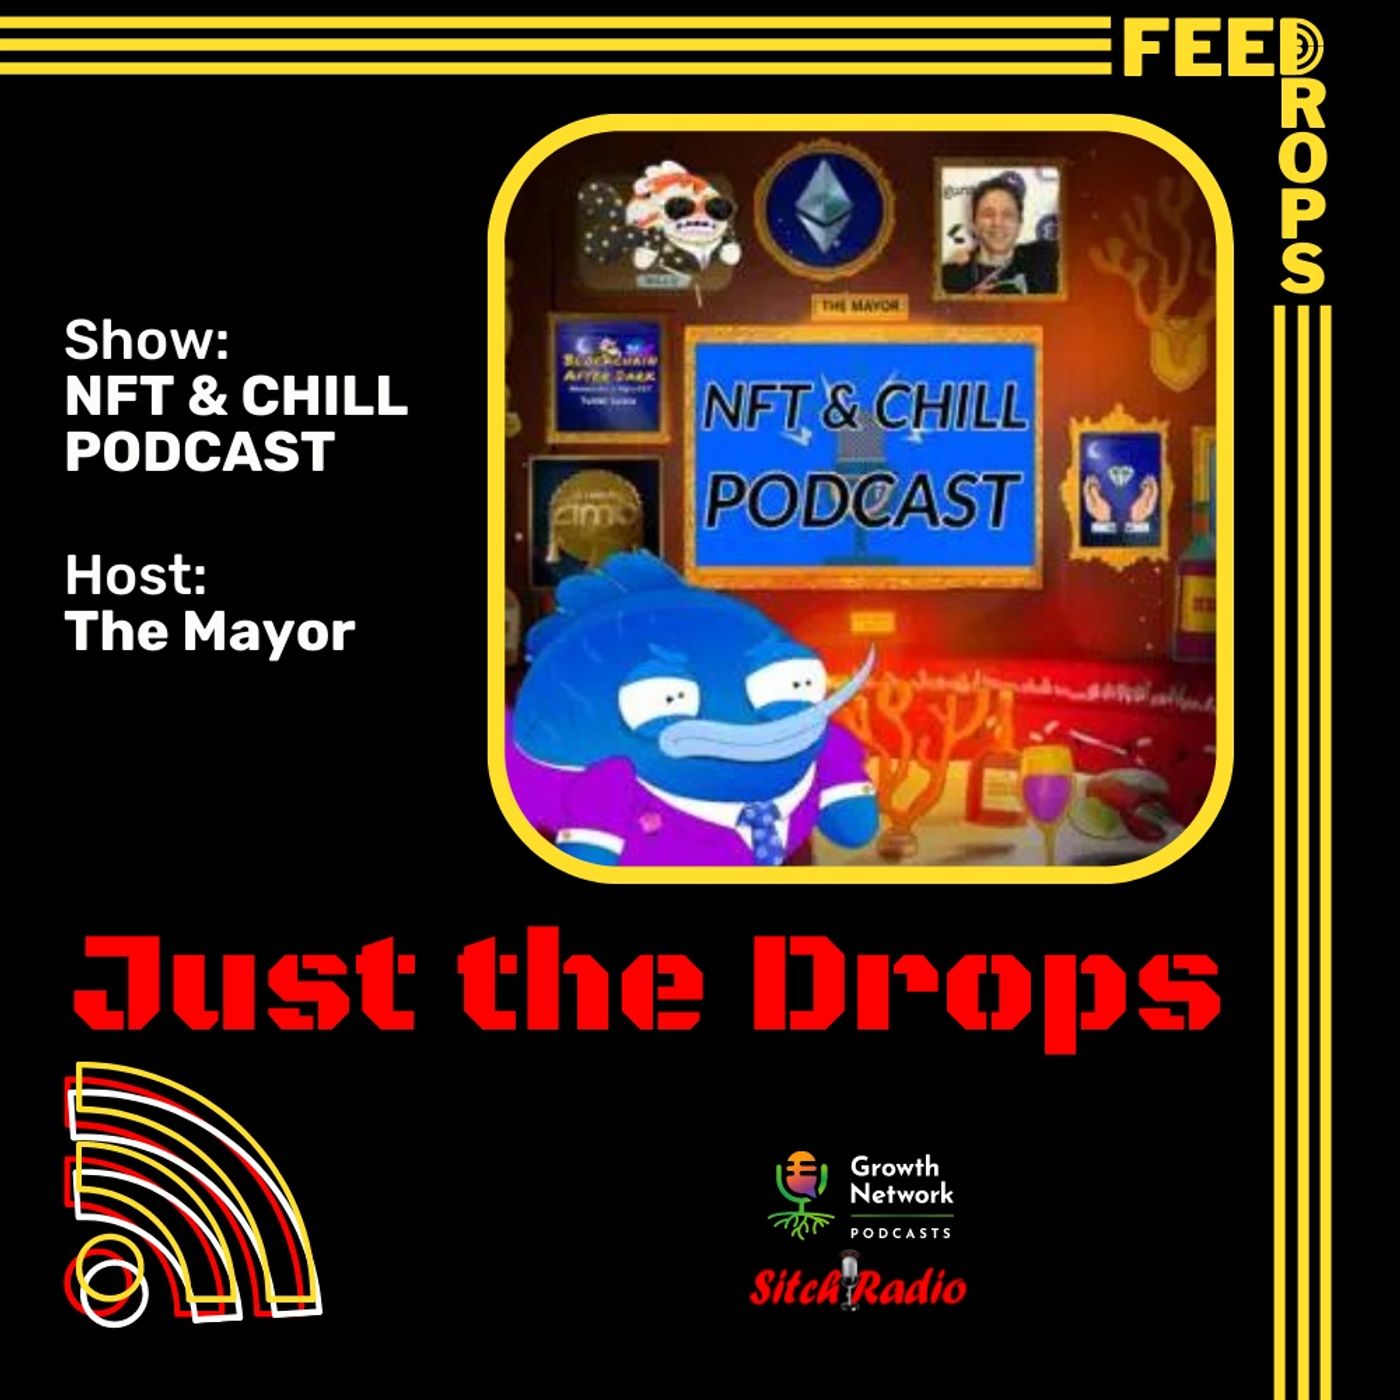 Feed Drop: NFT & Chill Podcast